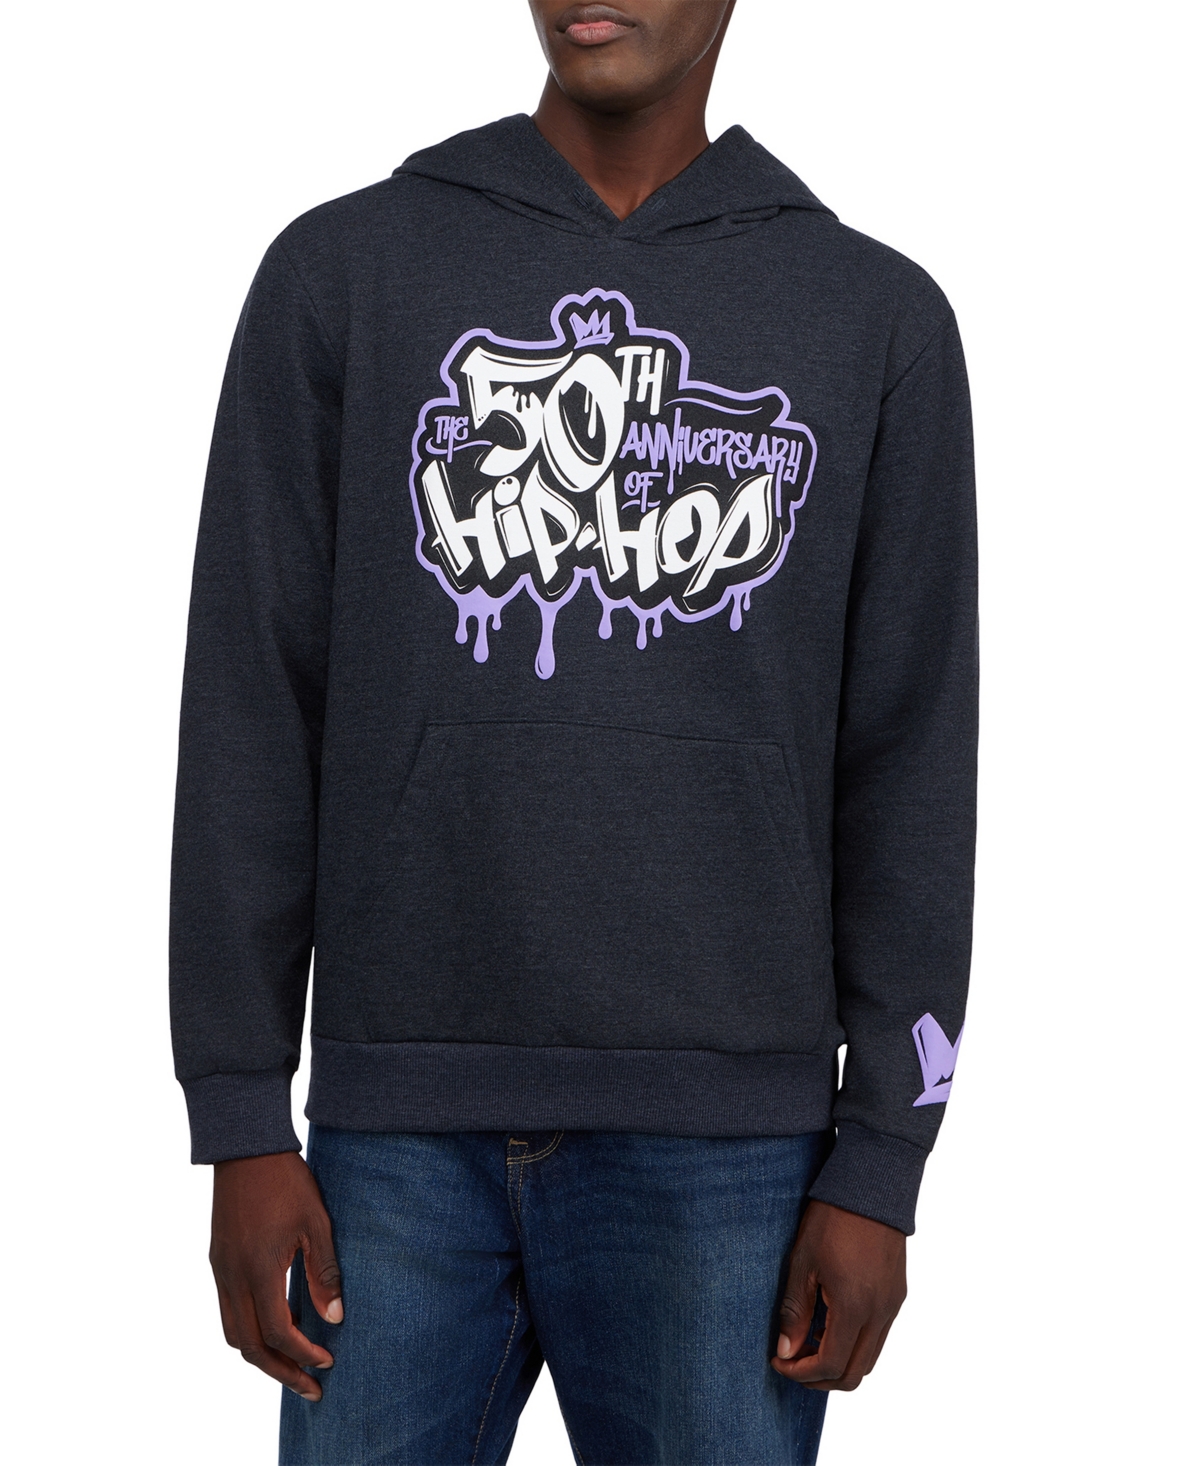 50 Year Anniversary Of Hip Hop Men's Drip Drop Graphic Hoodie - Charcoal